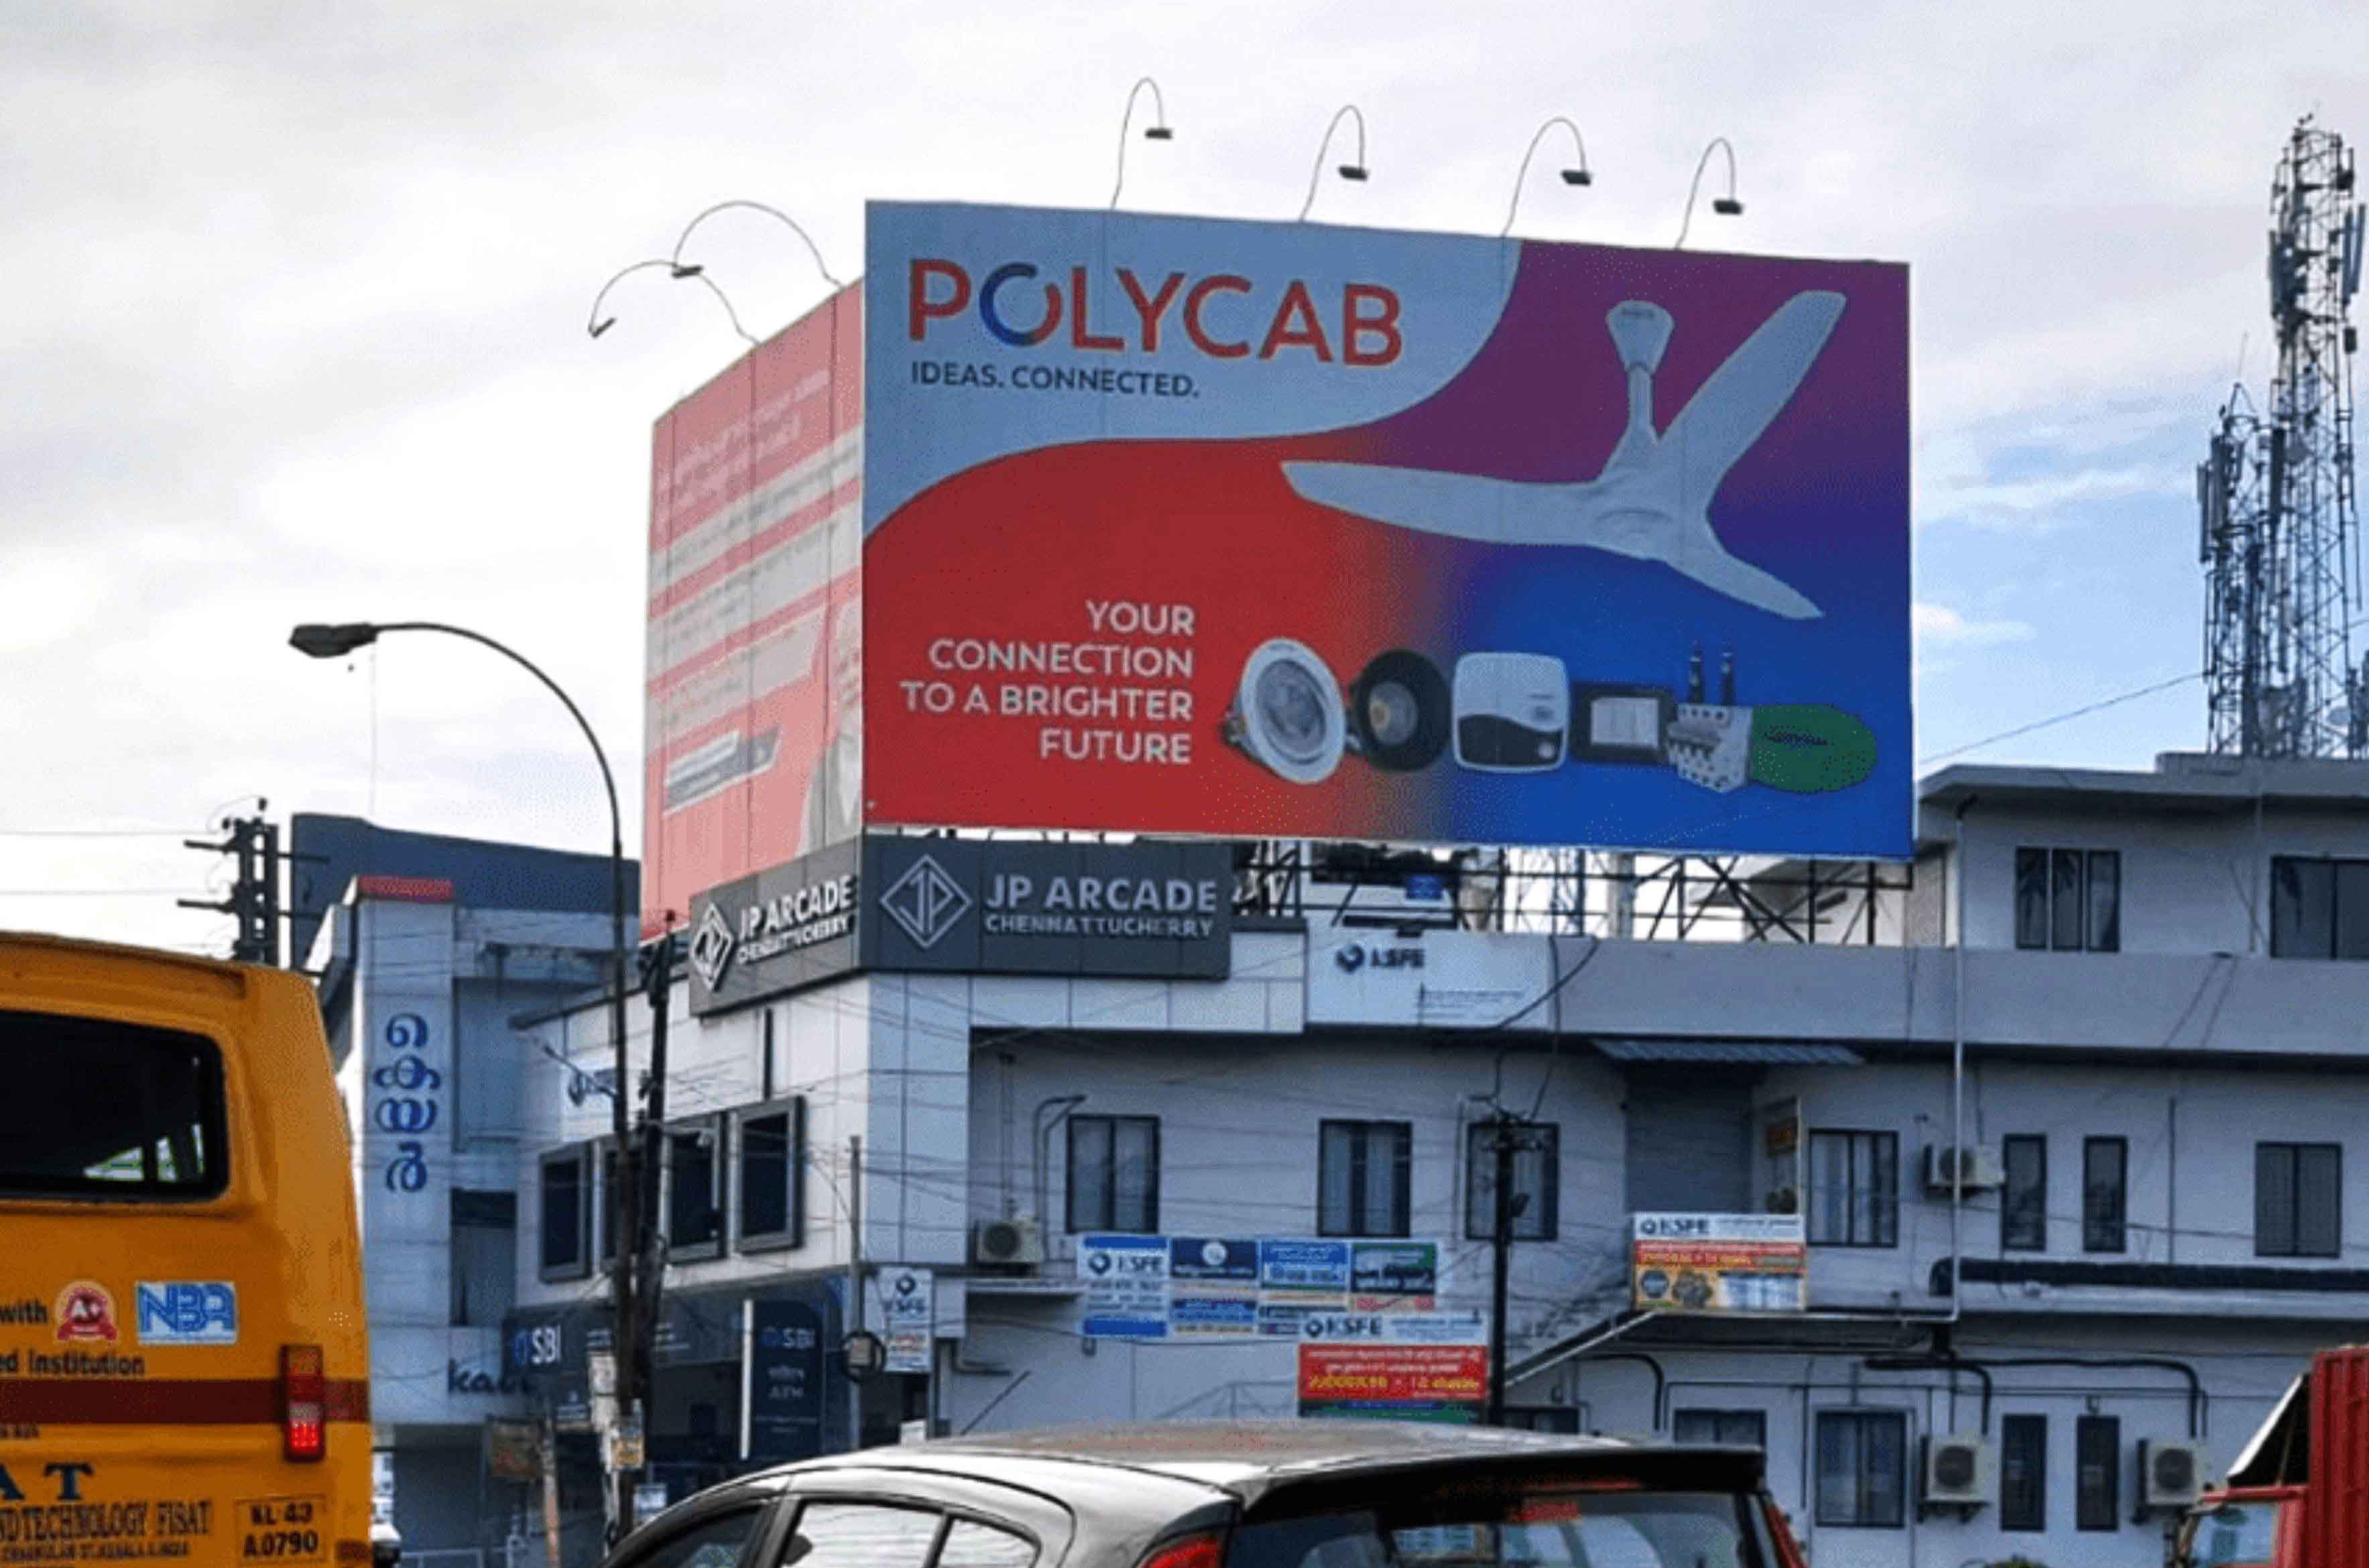 Polycab OOH campaign 